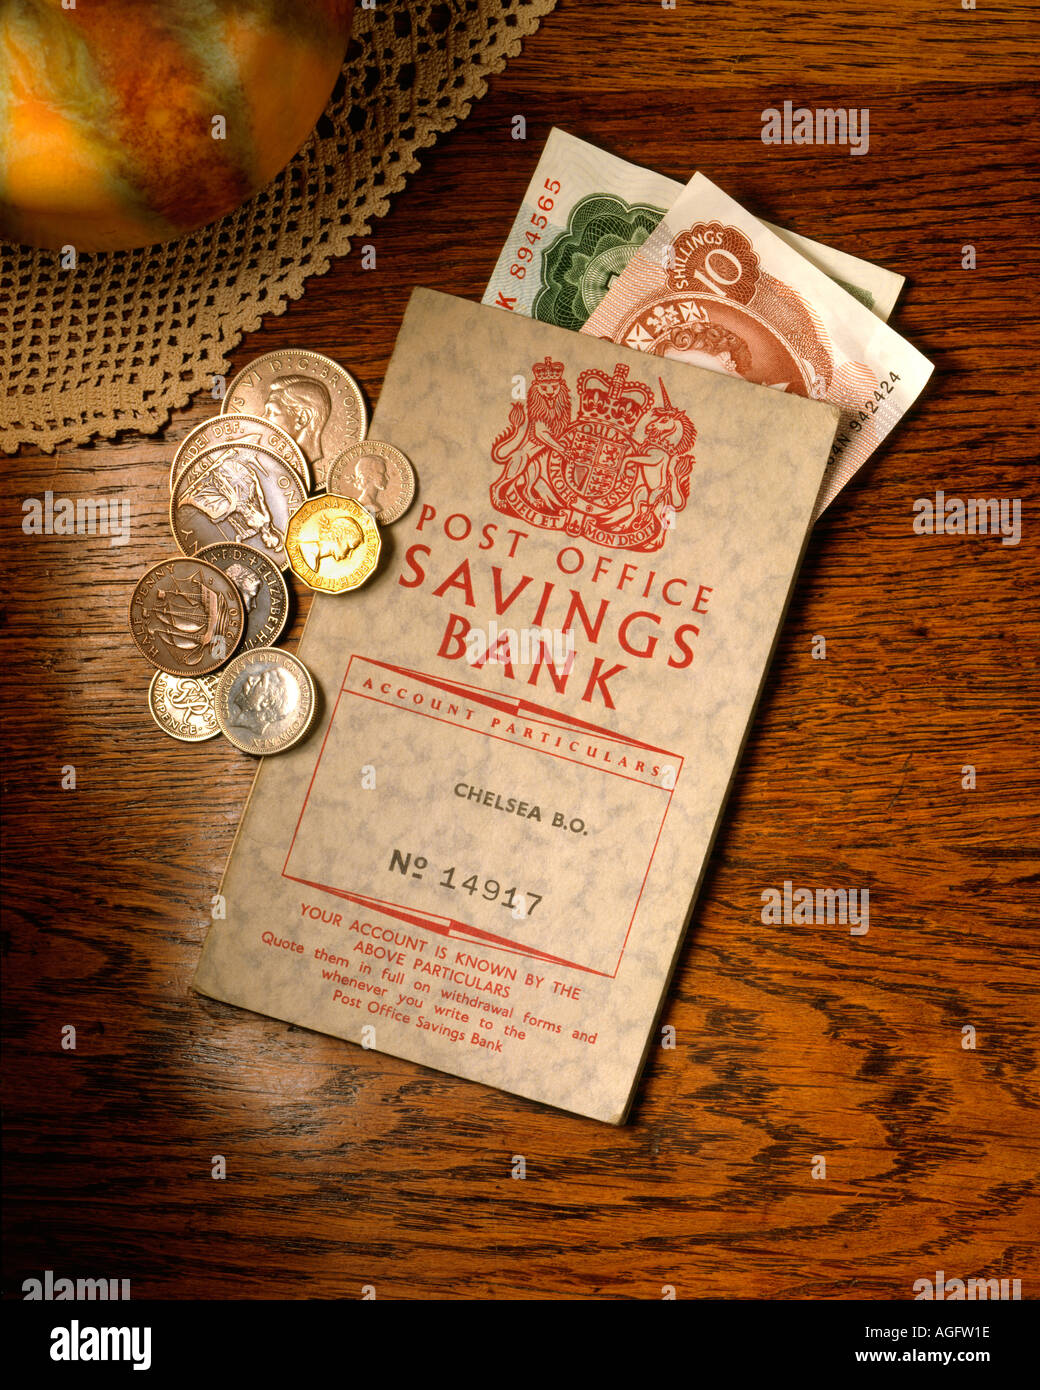 National Savings book with old currency from the United Kingdom Great Britain Stock Photo